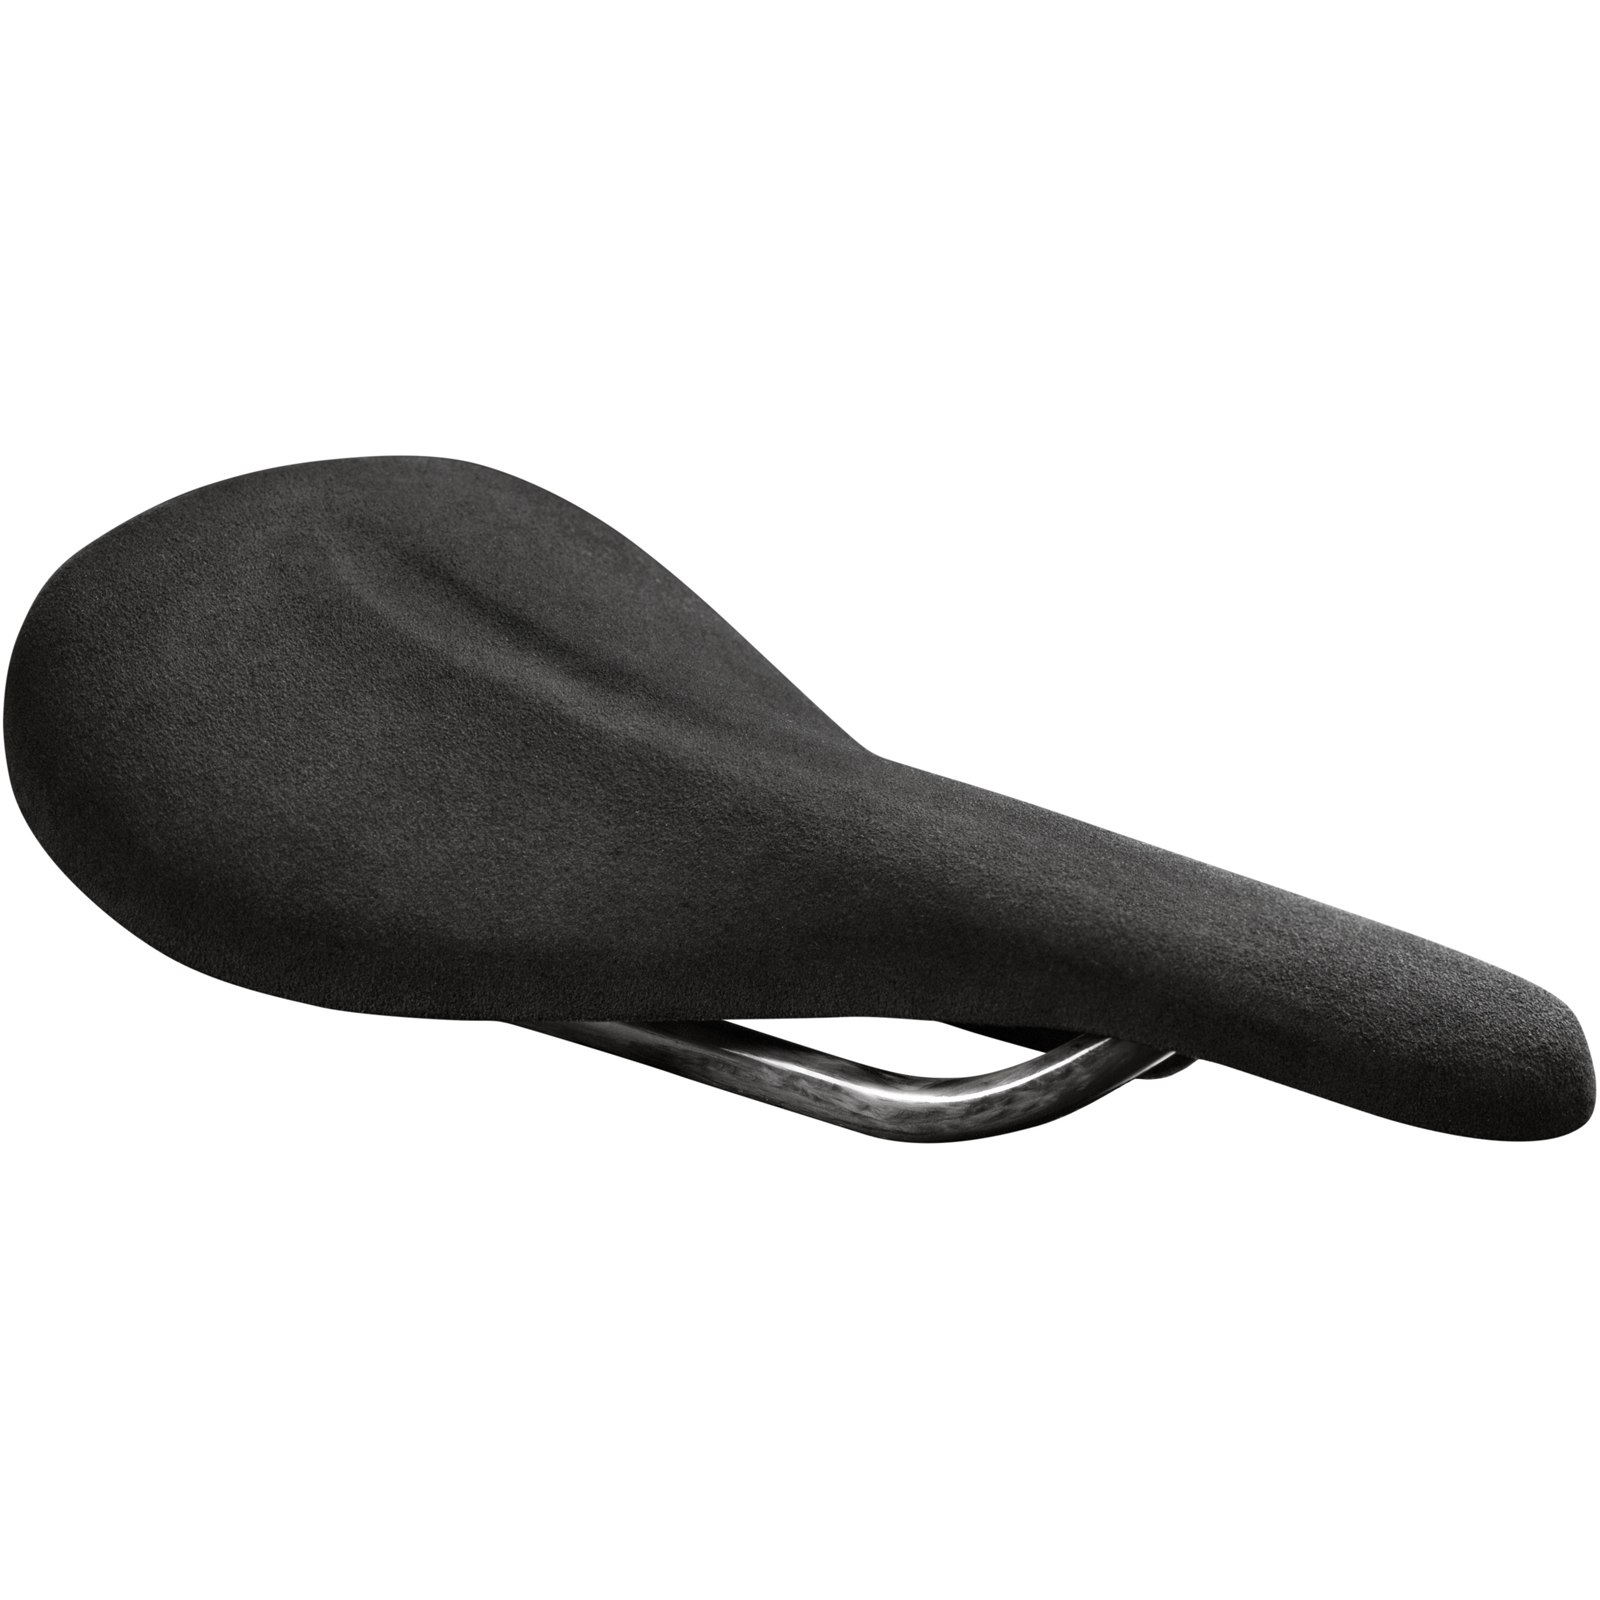 Picture of Beast Components Grip Carbon Saddle - Alcantara - 145mm, black